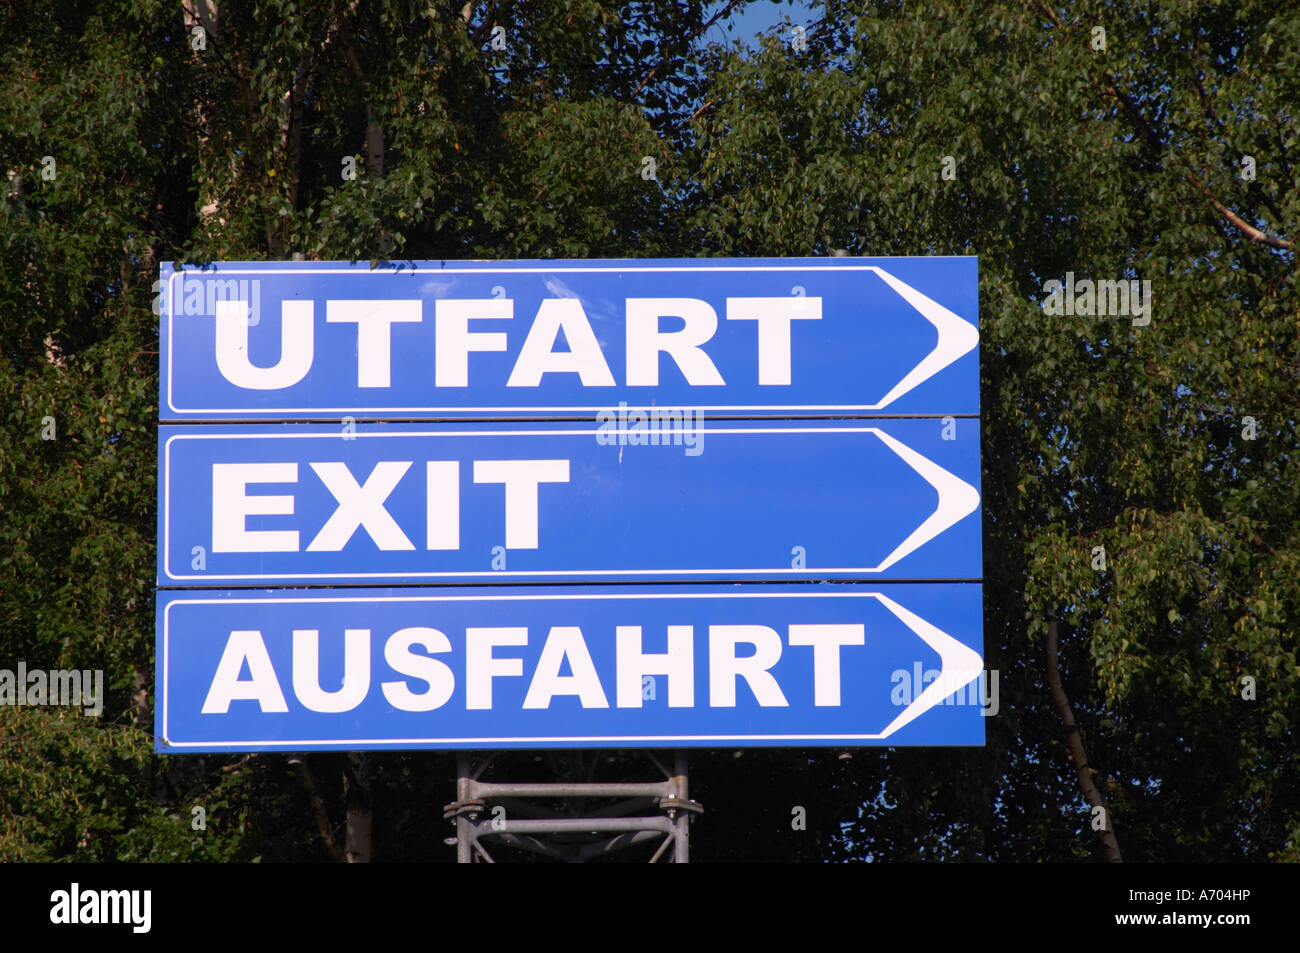 Signs saying exit in three languages, Swedish, Utfart, English, Exit, German, Ausfahrt at Astrid Lindgren's World. Vimmerby town Smaland region. Sweden, Europe. Stock Photo